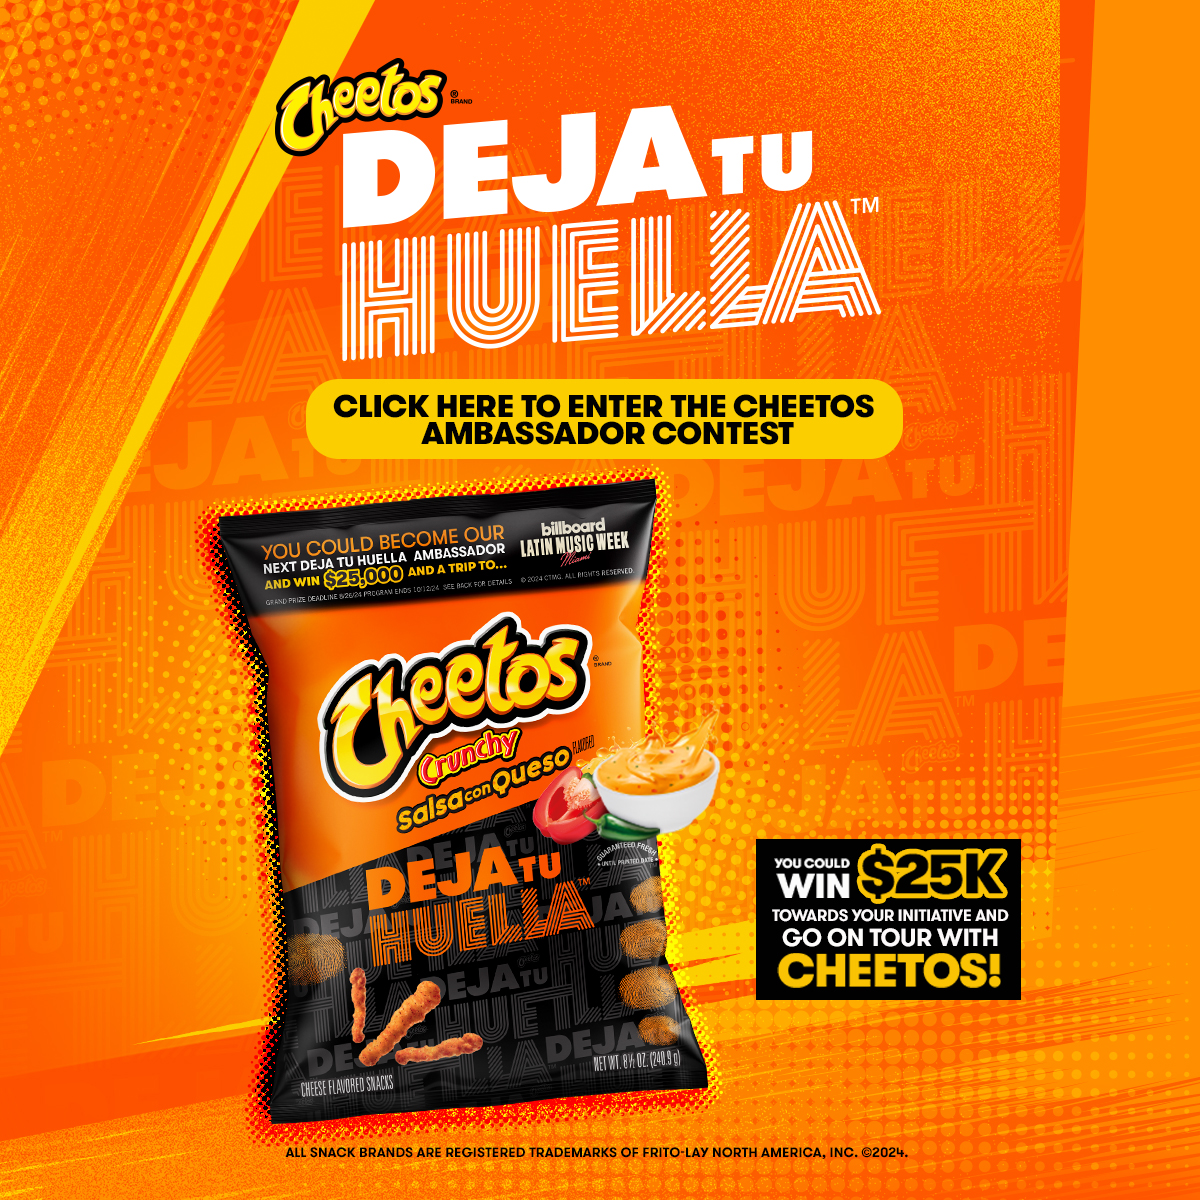 Enter For A Chance To Be The Next Cheetos Deja Tu Huella Ambassador And To Win $25K Towards Your Initiative.